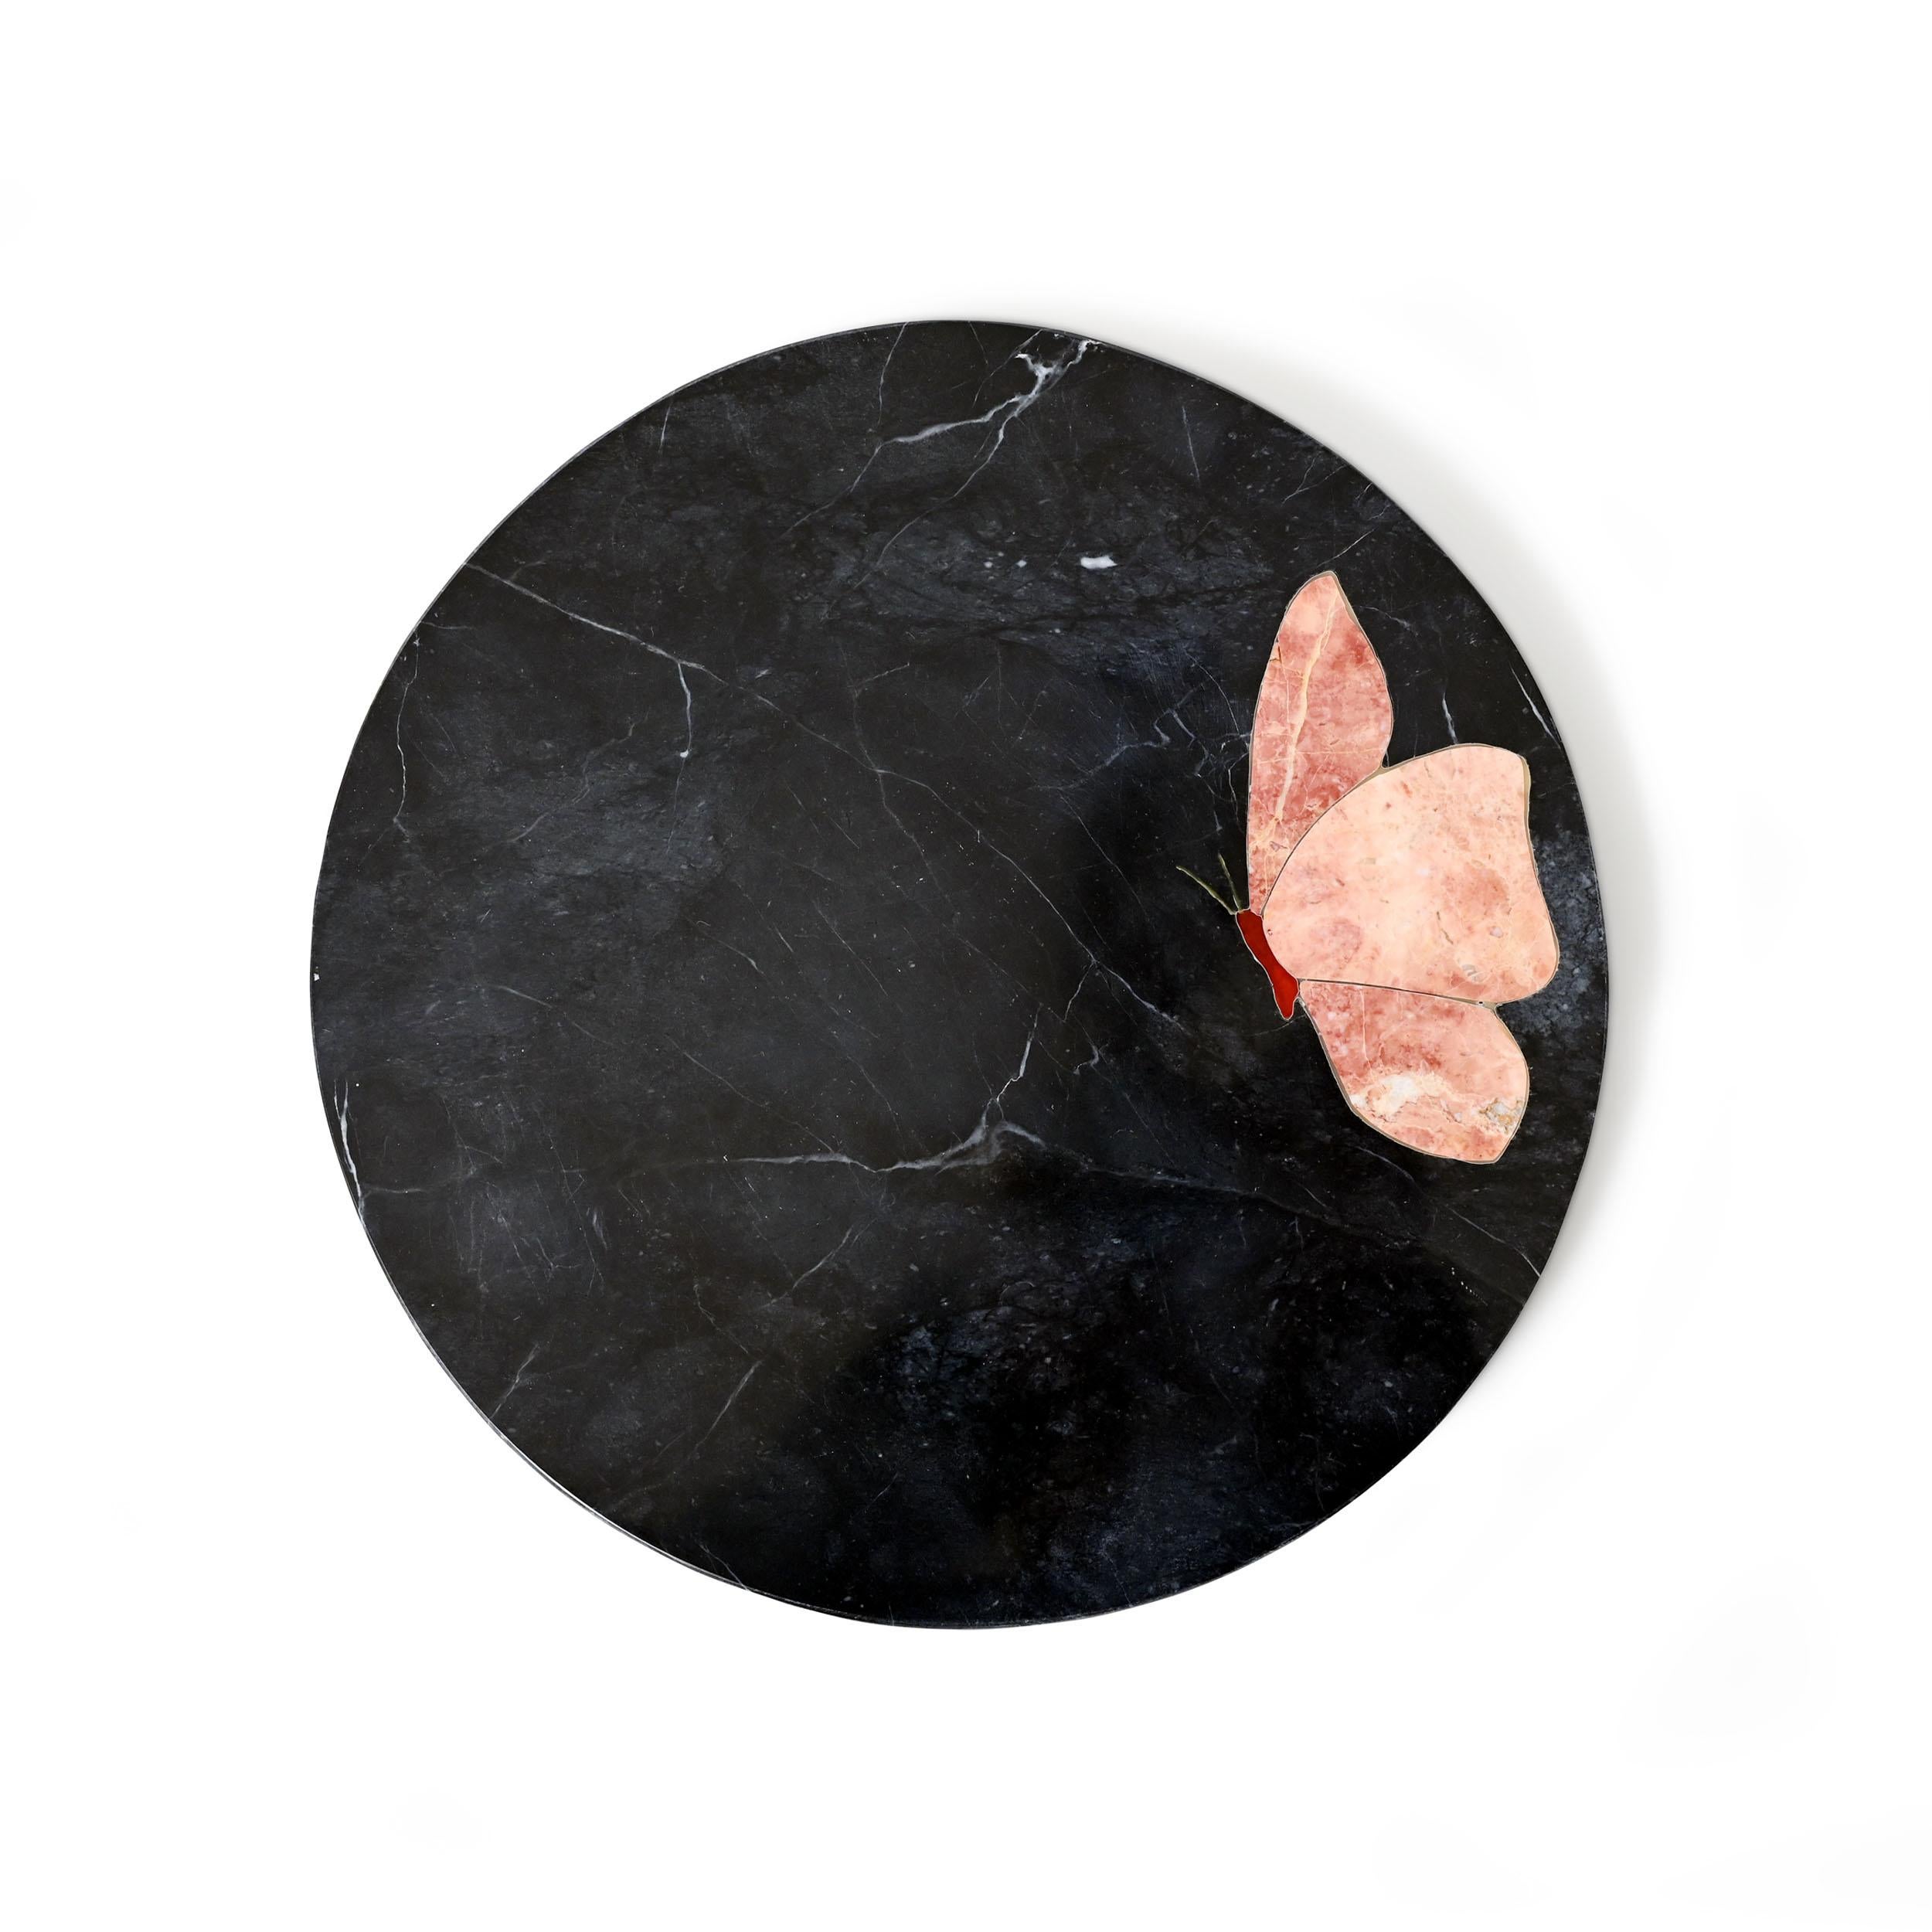 Parvaneh platter I by Studio Lel
Dimensions: D30.5 x H30.5 x H2.5 cm
Materials: Marble

The word Ara is the onomatopoeic genus of the macaw, referencing the sounds made by the bright parrots depicted in every piece of the collection. Set in one